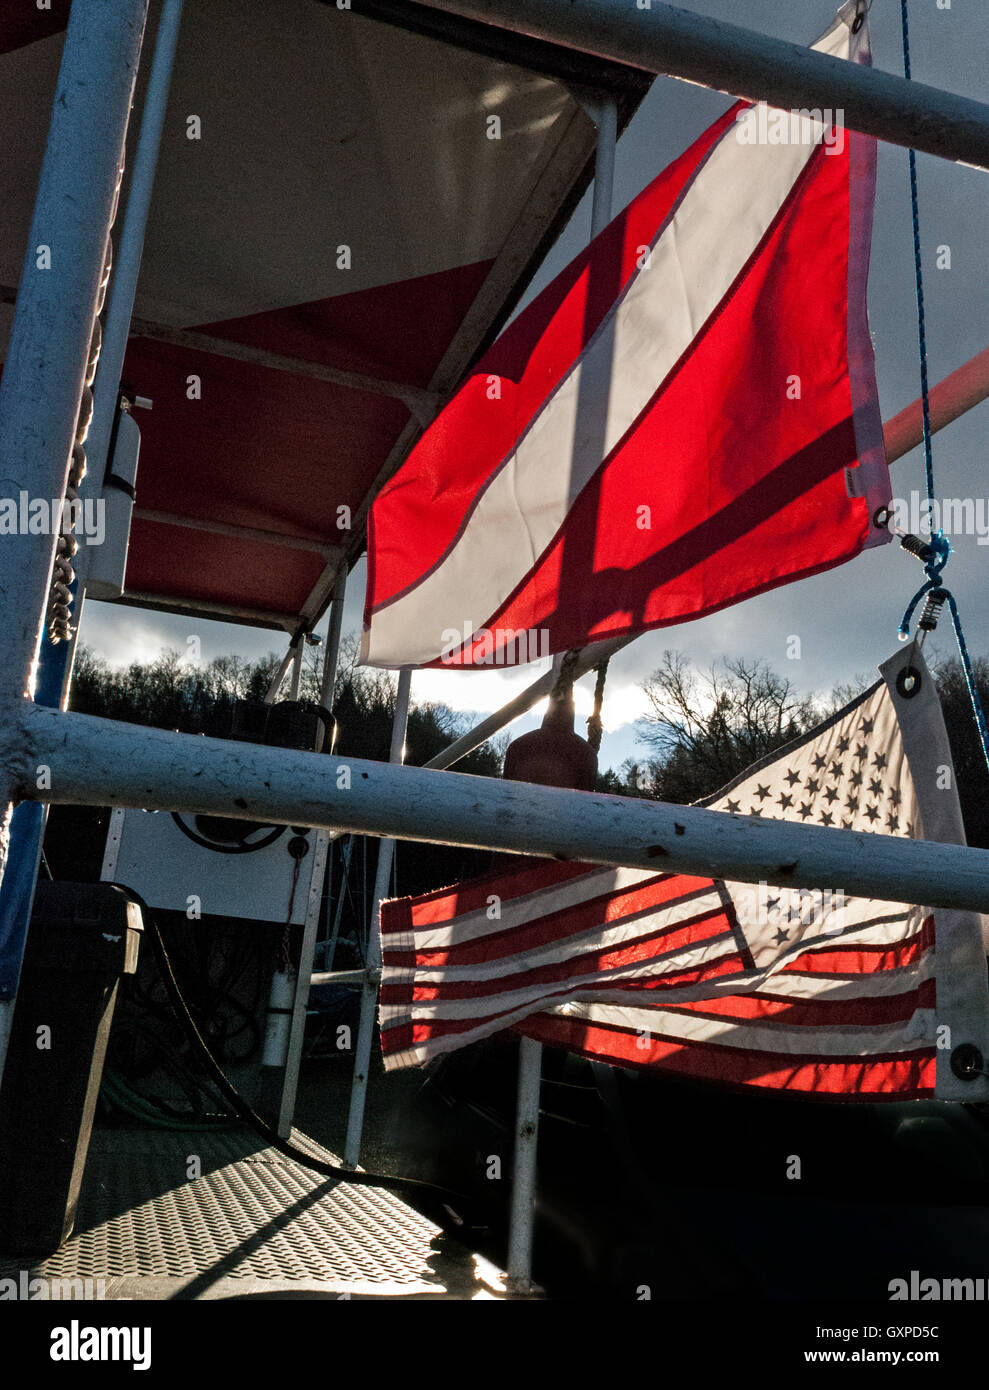 Scuba flag and American flag on a boat Stock Photo